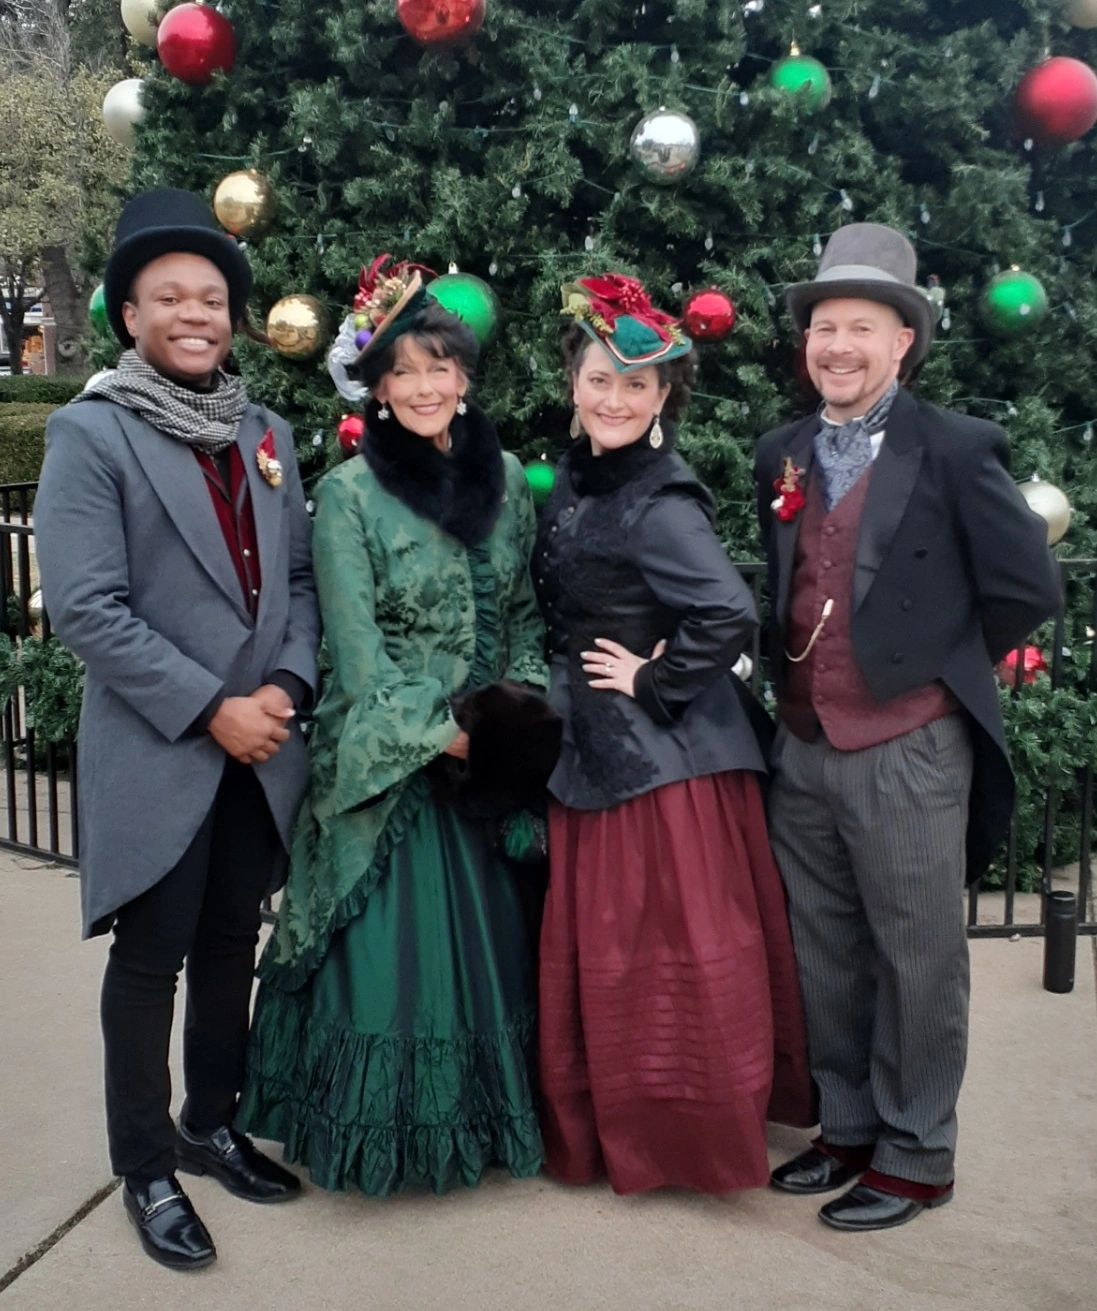 Uptown Carolers of Dallas / Fort Worth